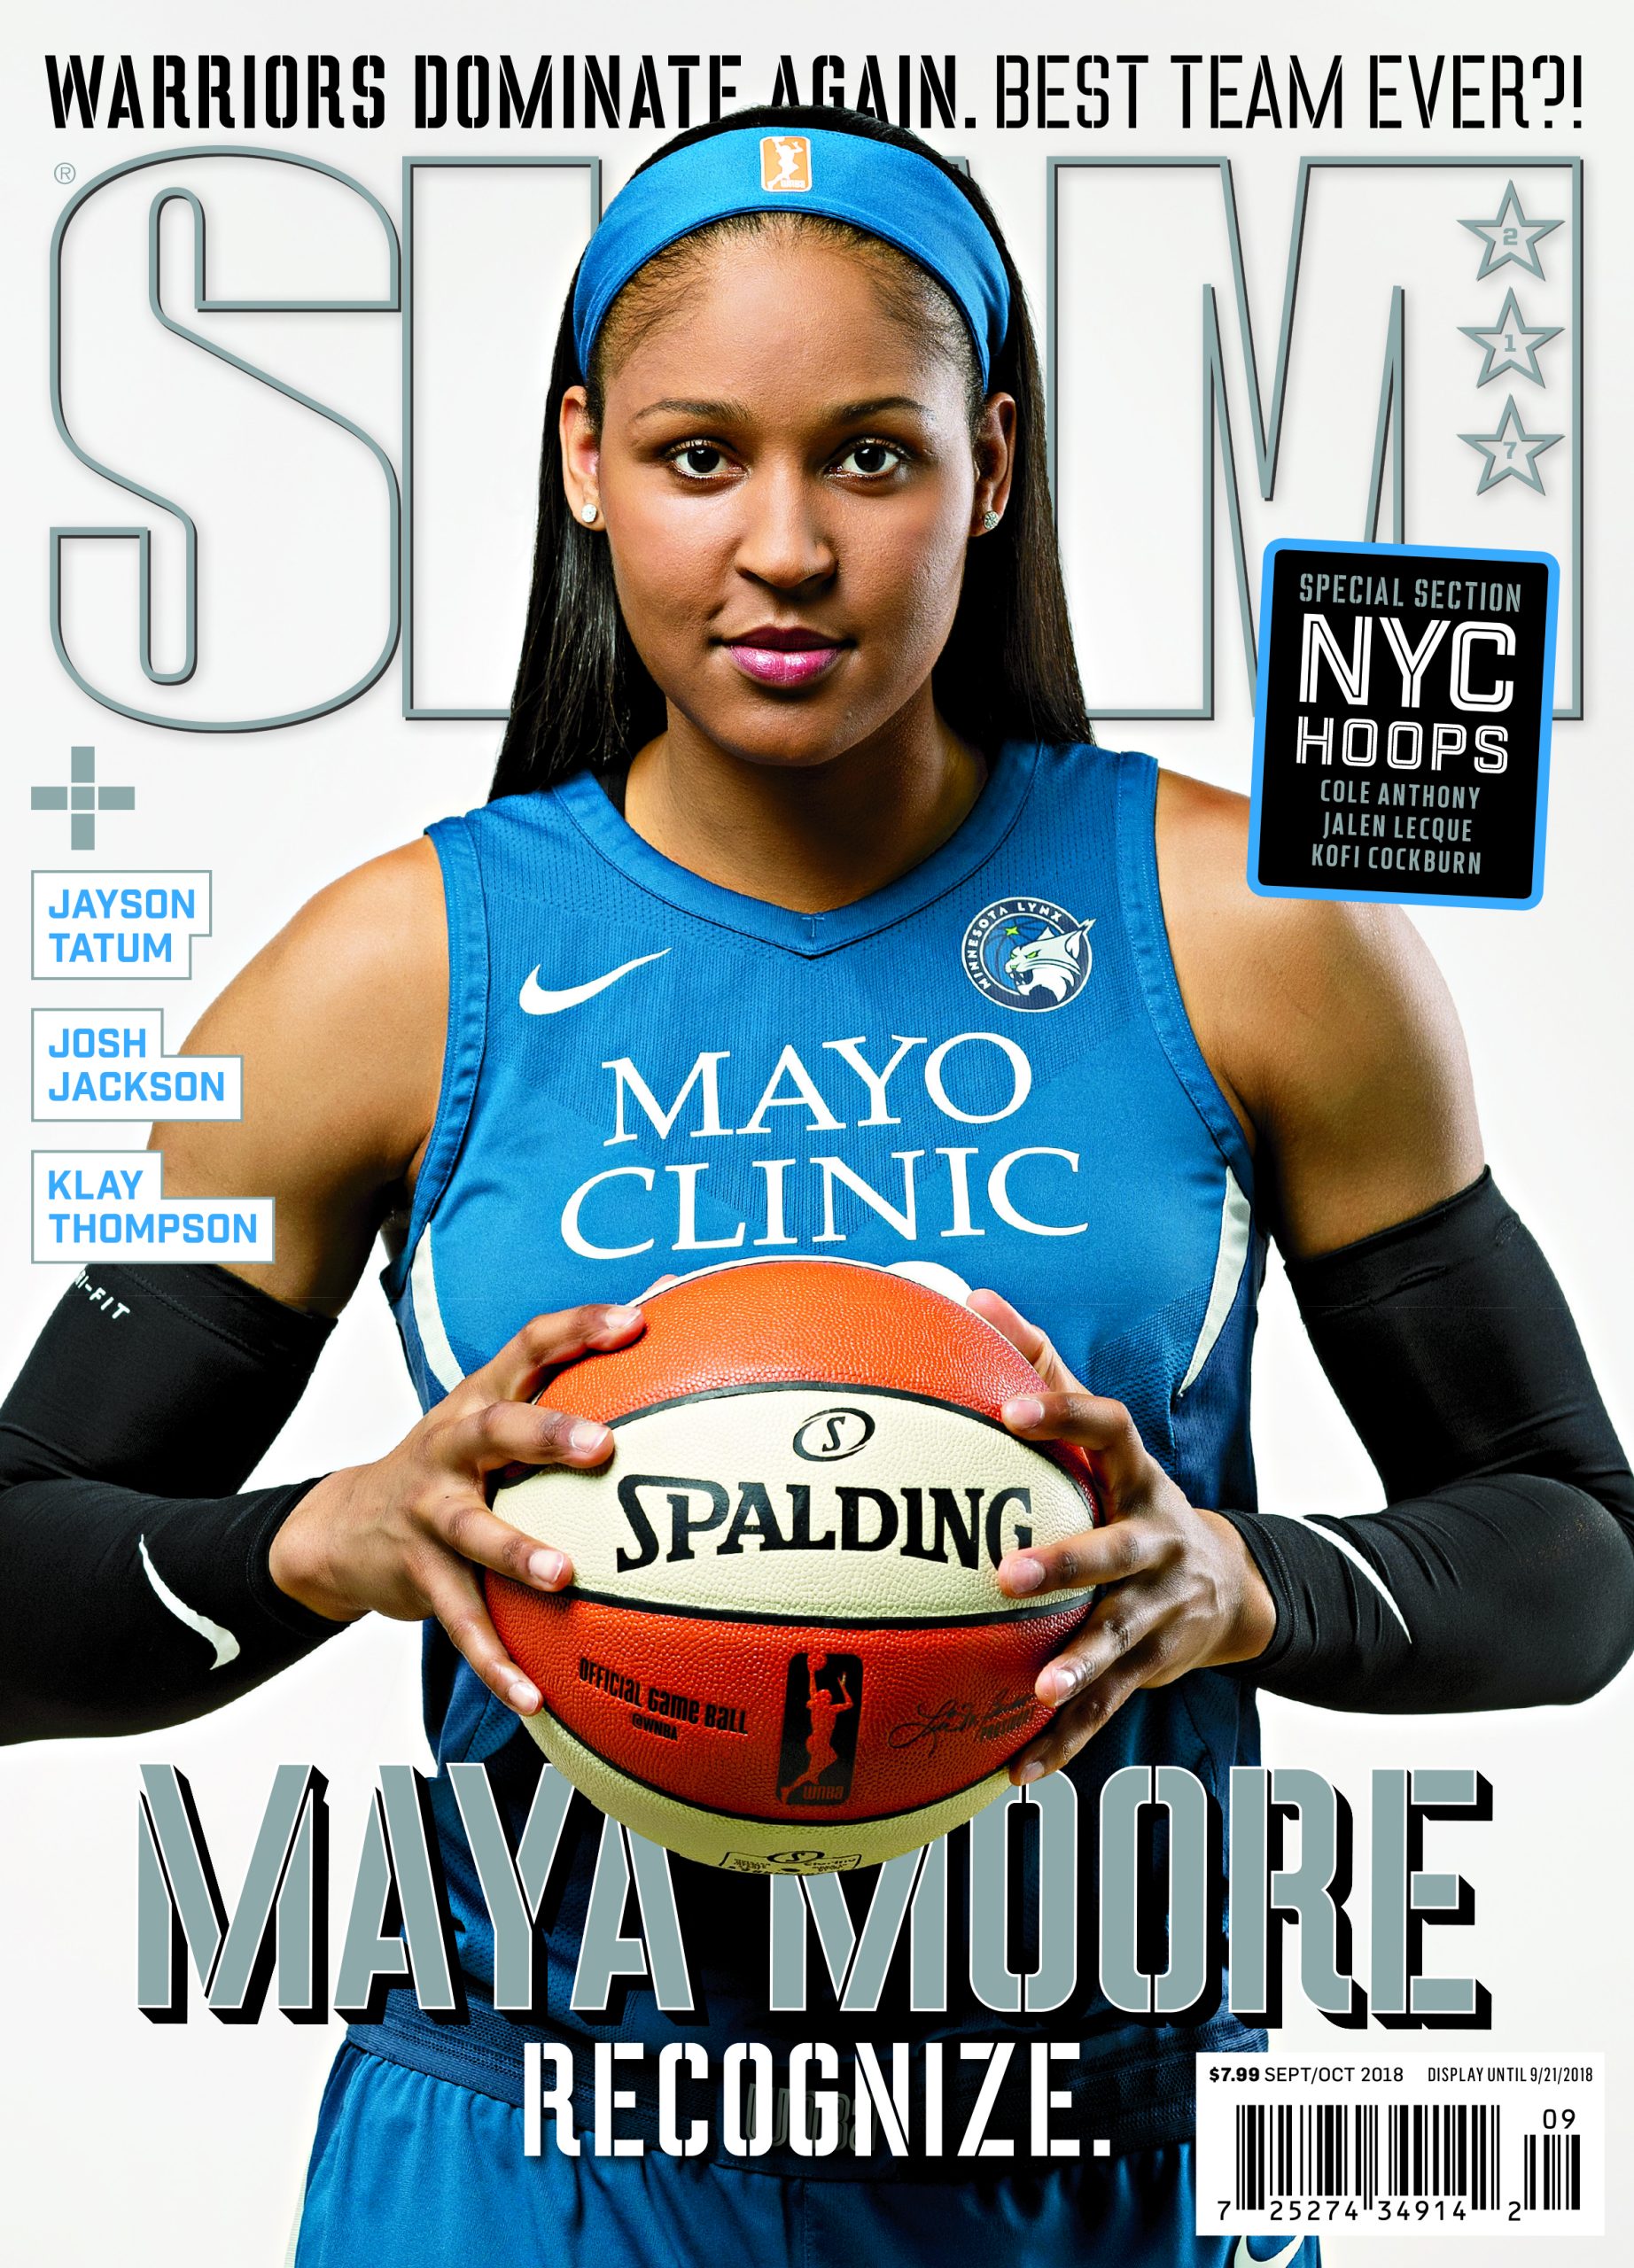 SLAM’s Official Archivist Details Maya Moore’s Excellence and Tracking Down Her Illustrious SLAM Cover